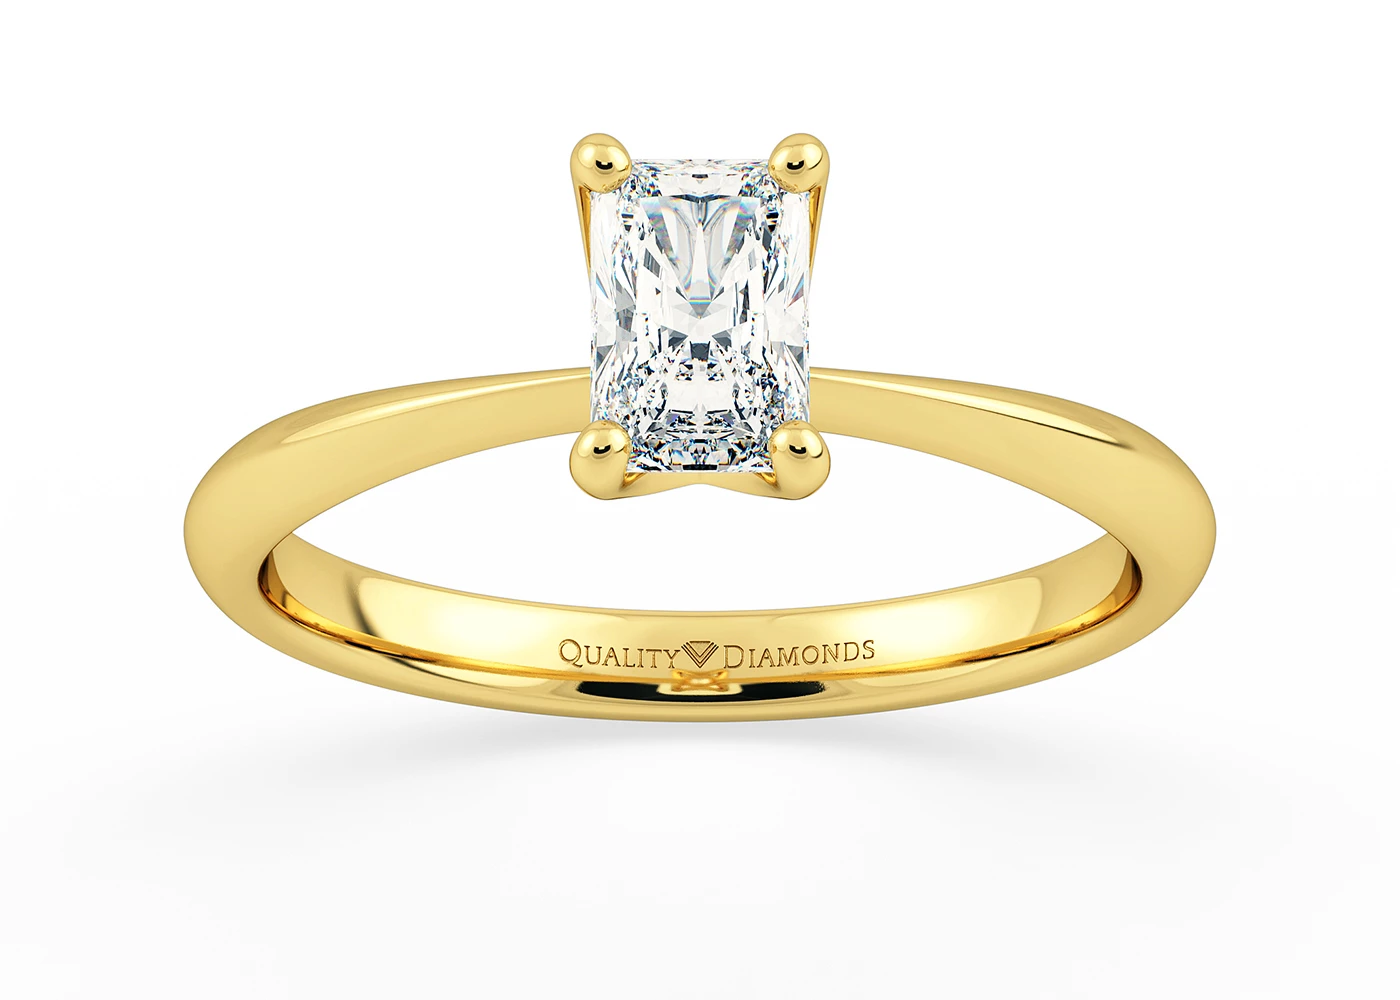 Half Carat Radiant Solitaire Diamond Engagement Ring in 18K Yellow Gold